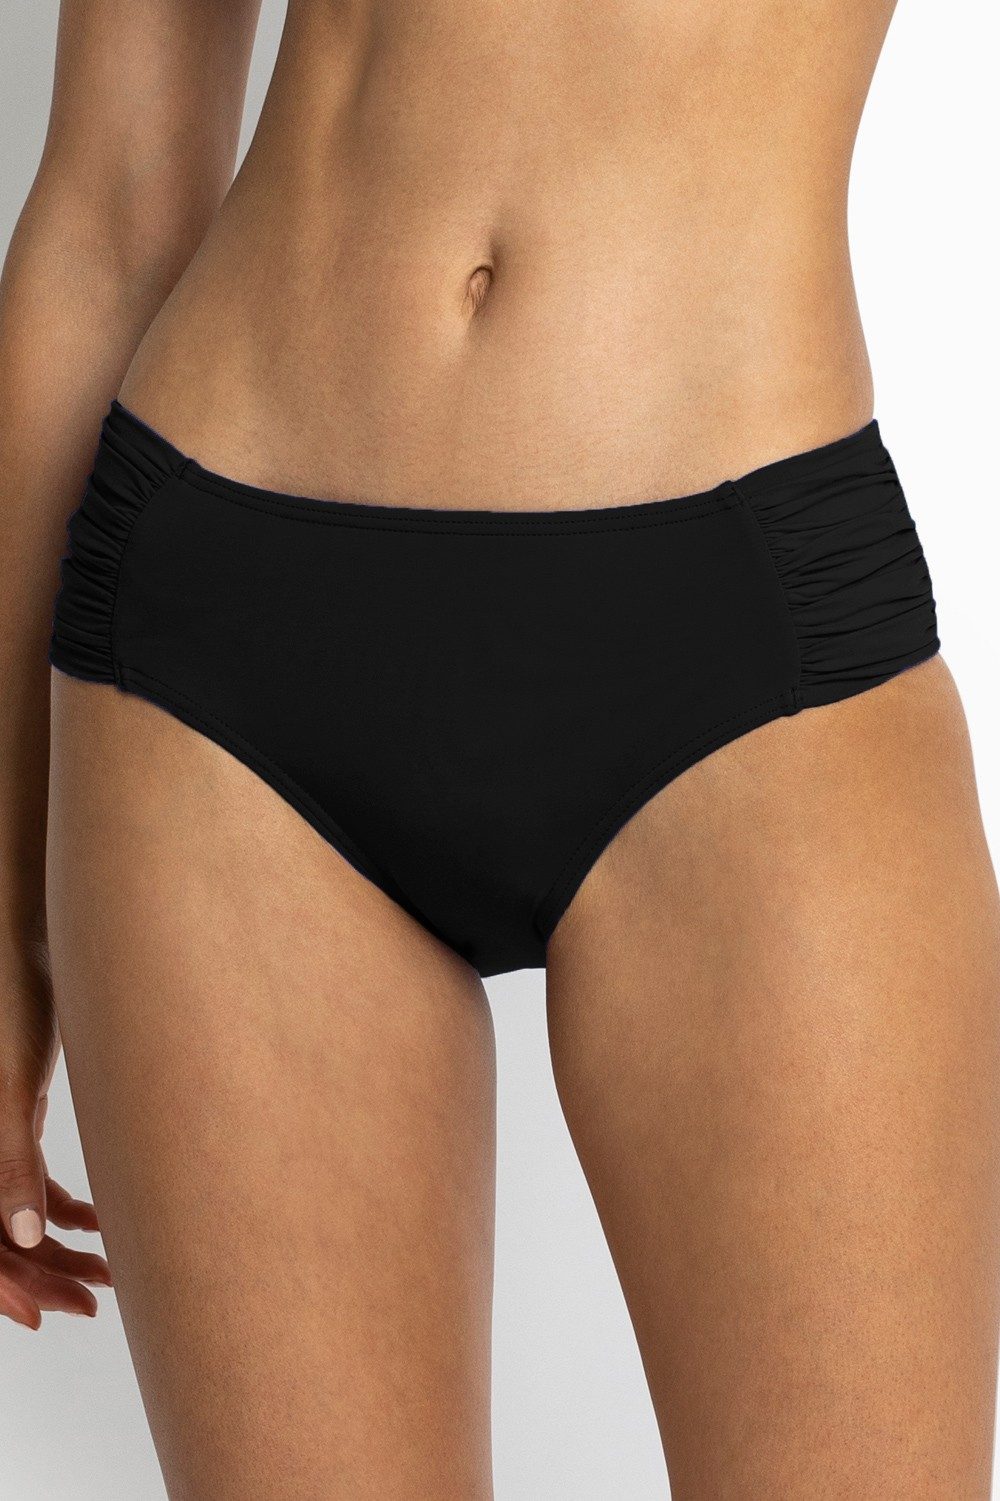 Modest and conservative bikini bottoms with more coverage for women.